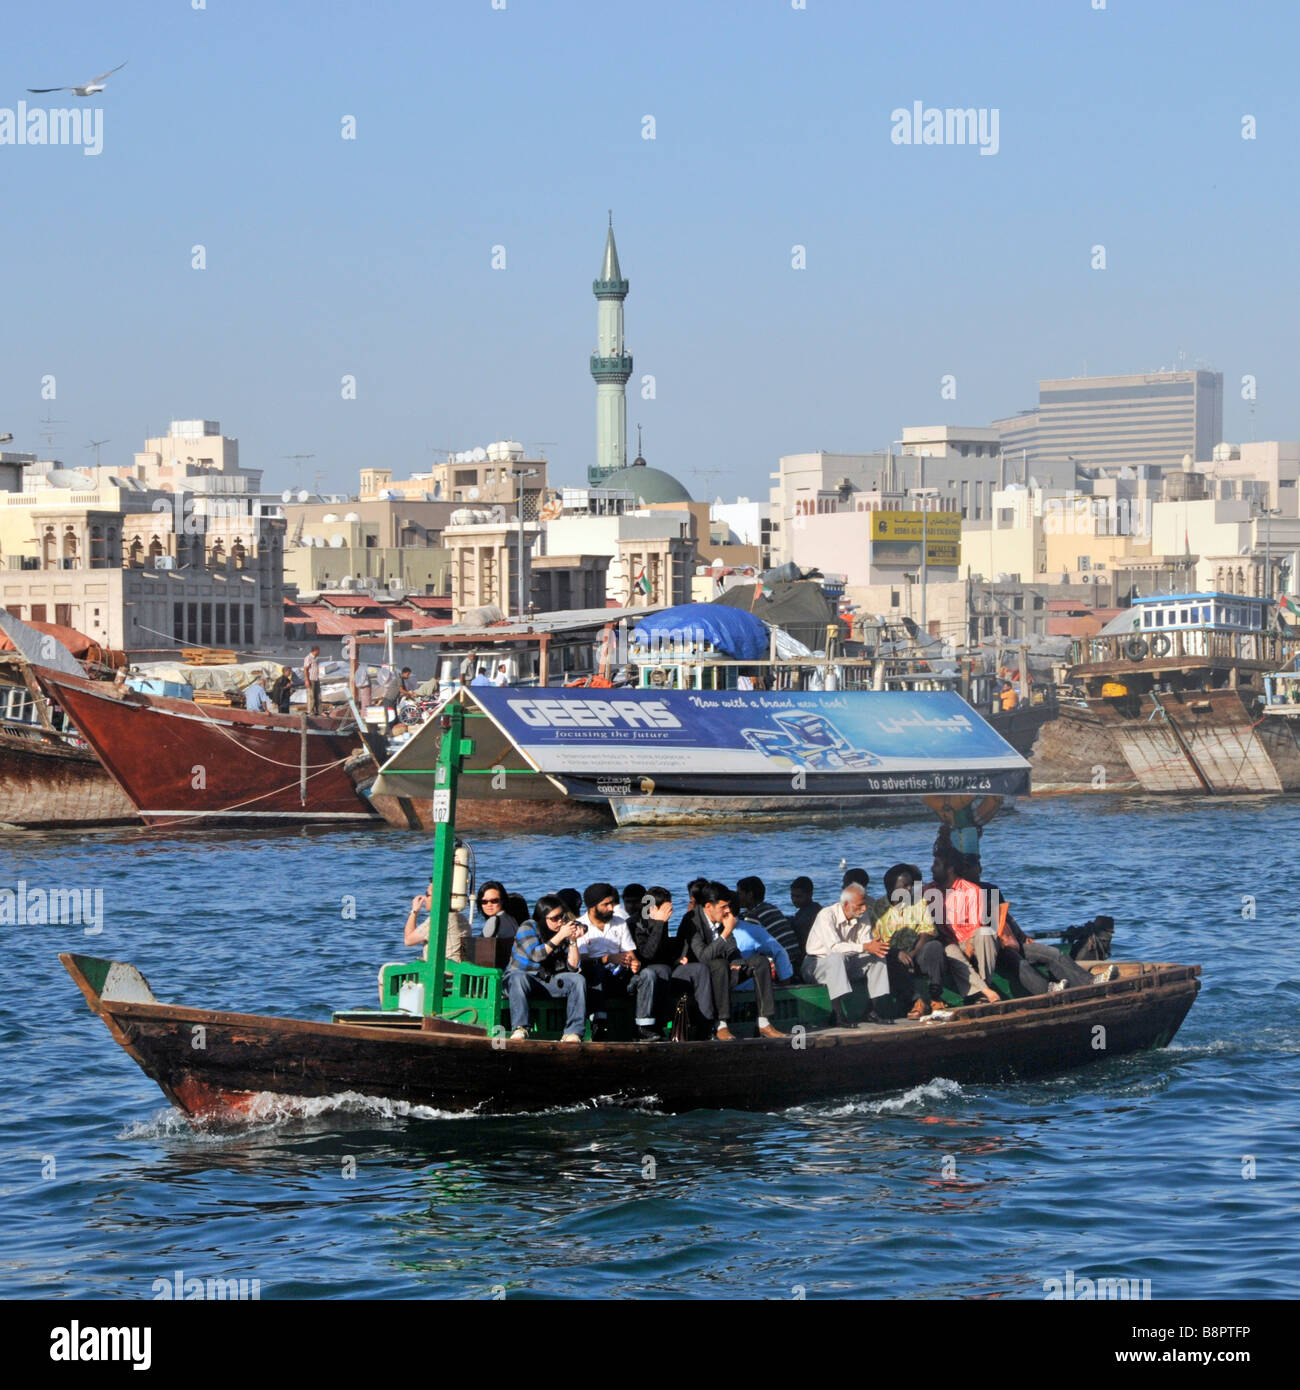 Dubai Creek close up of Abras water taxis and passengers includes older part of waterfront and mosque minaret Stock Photo